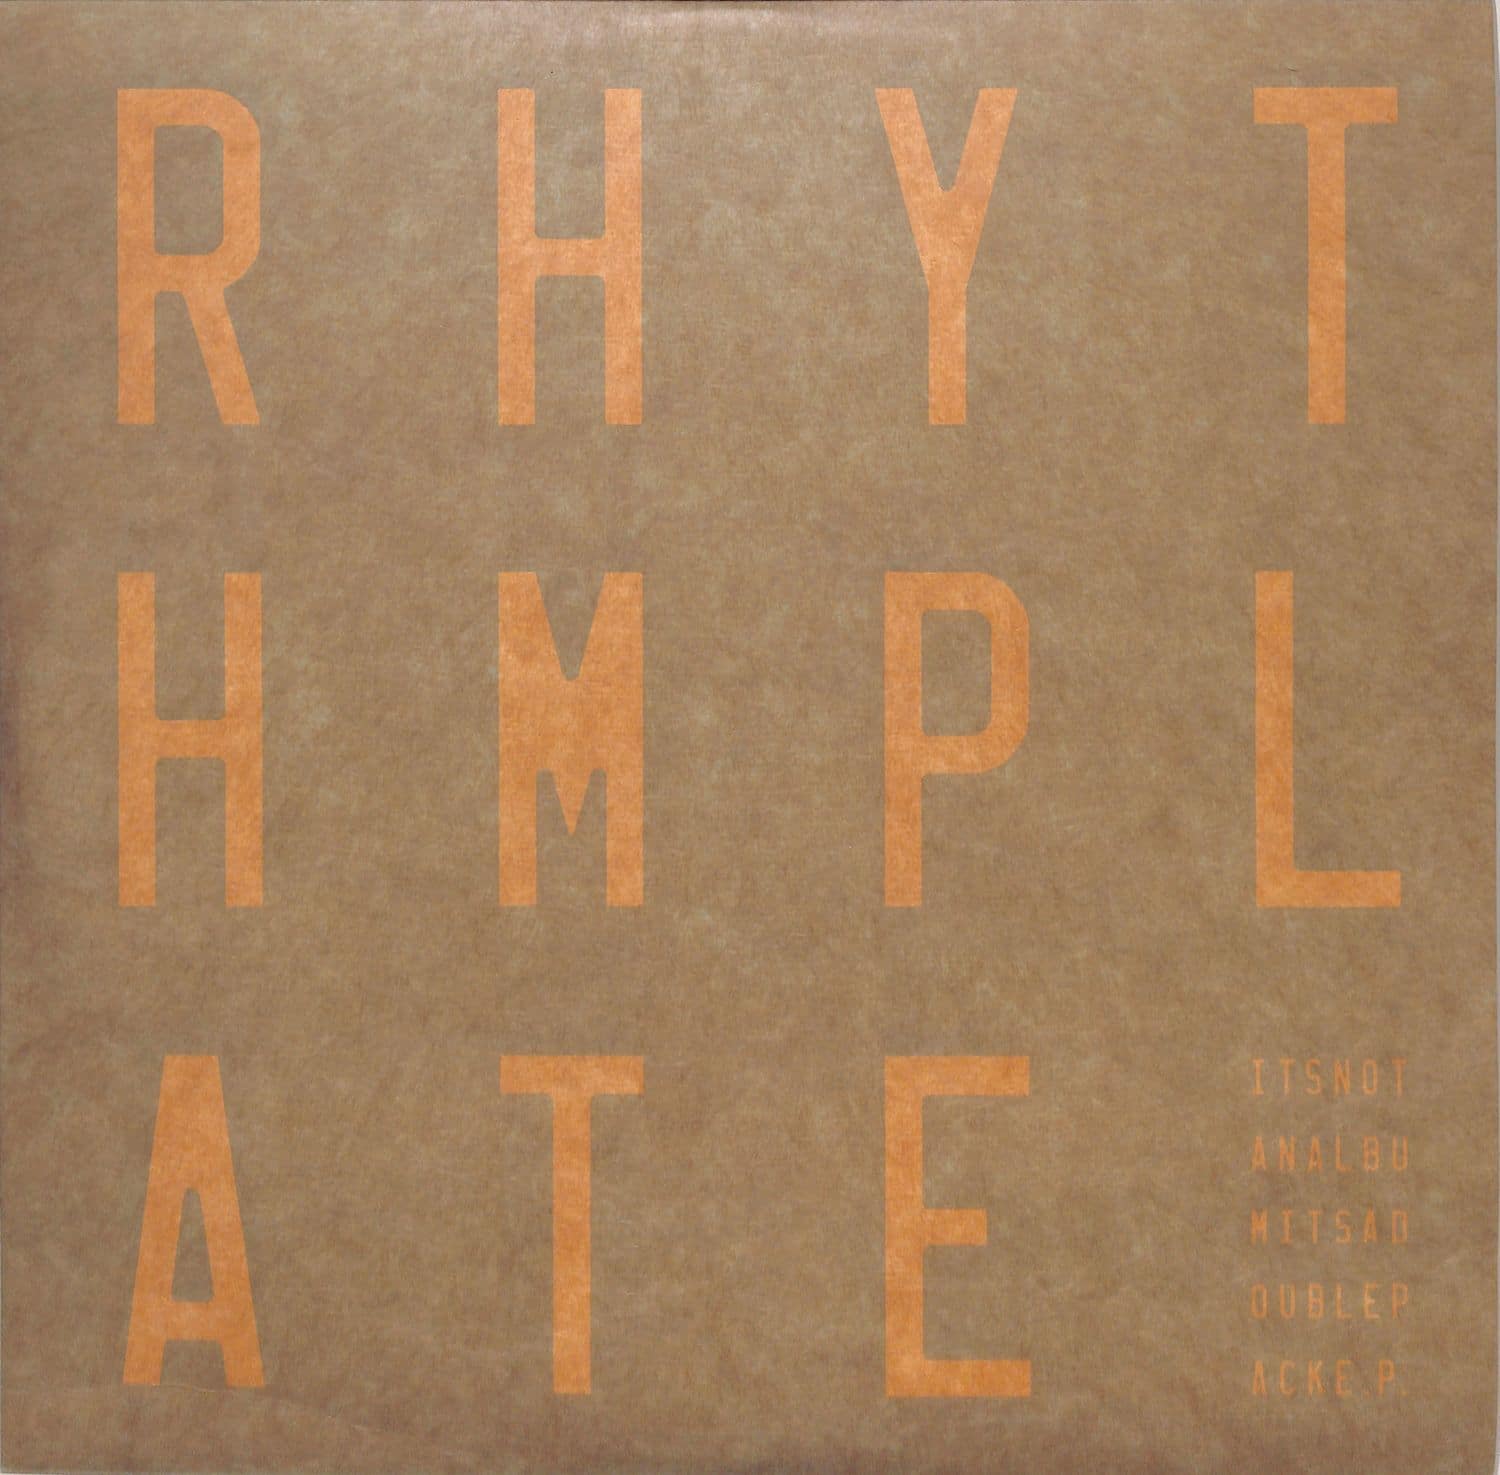 Rhythm Plate - ITS NOT AN ALBUM ITS A DOUBLEPACK EP 